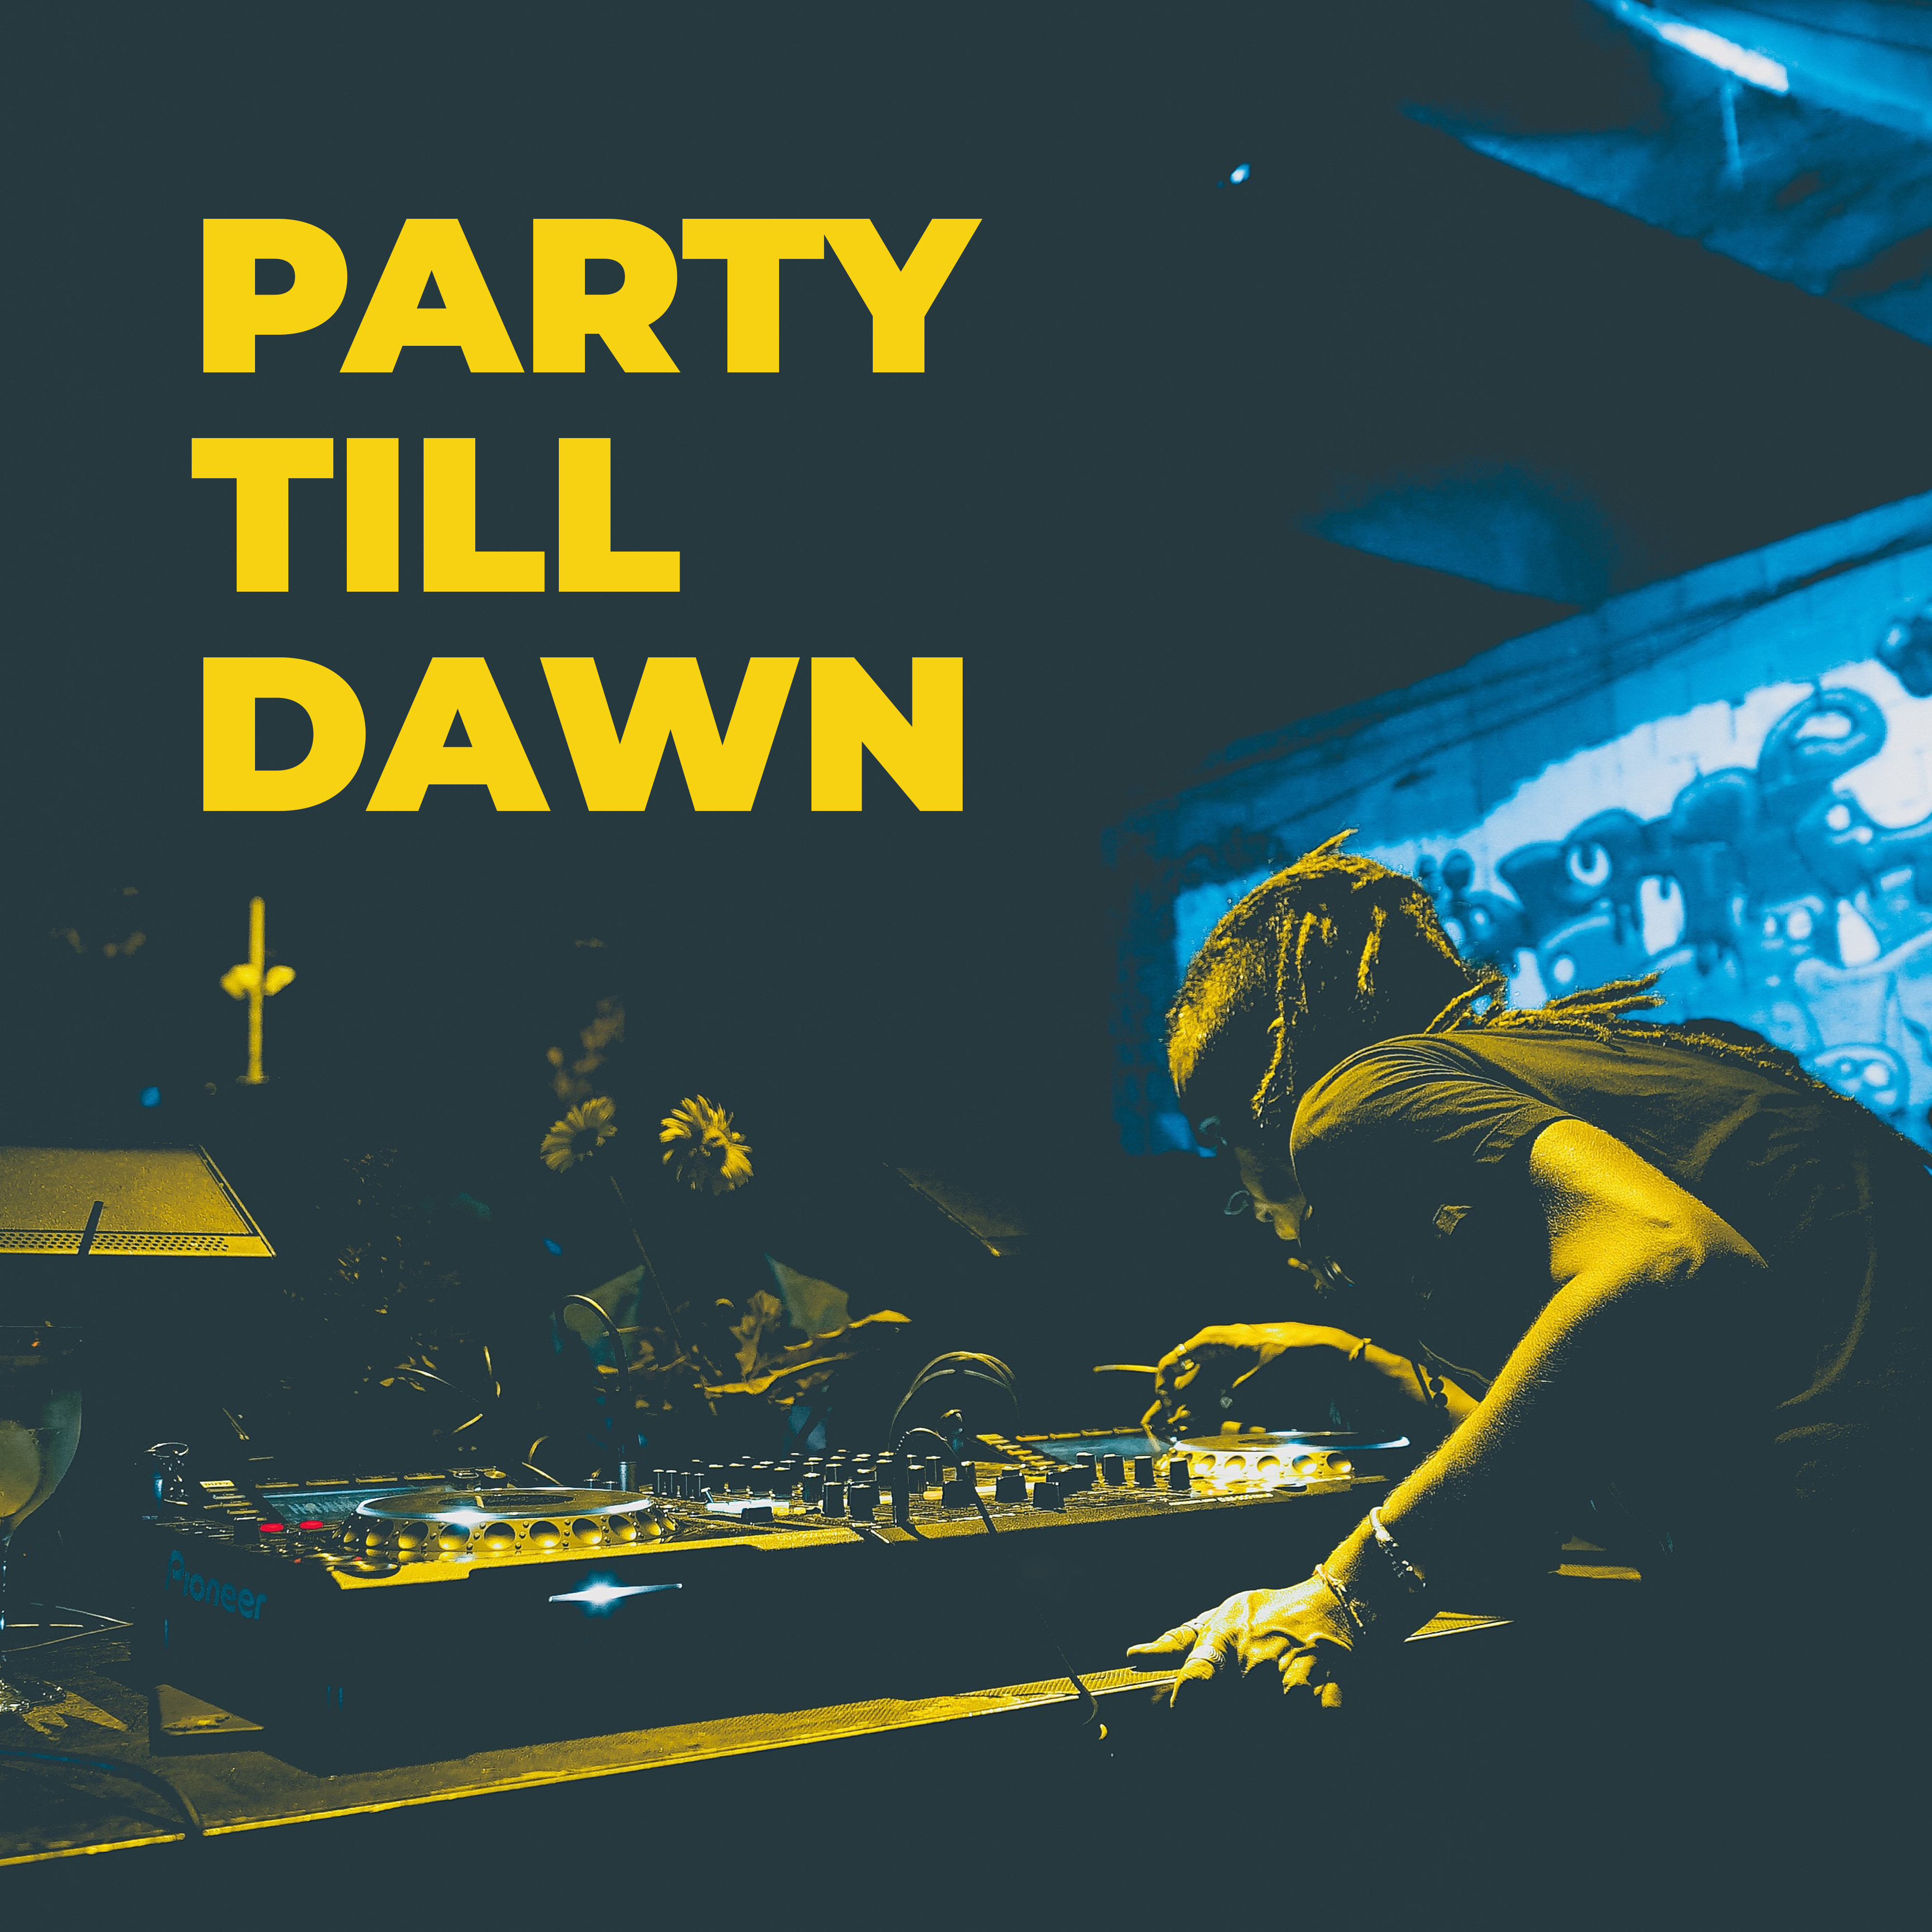 Party till Dawn: Best Chillout Music for Partying, Celebration and Fun All Night Long